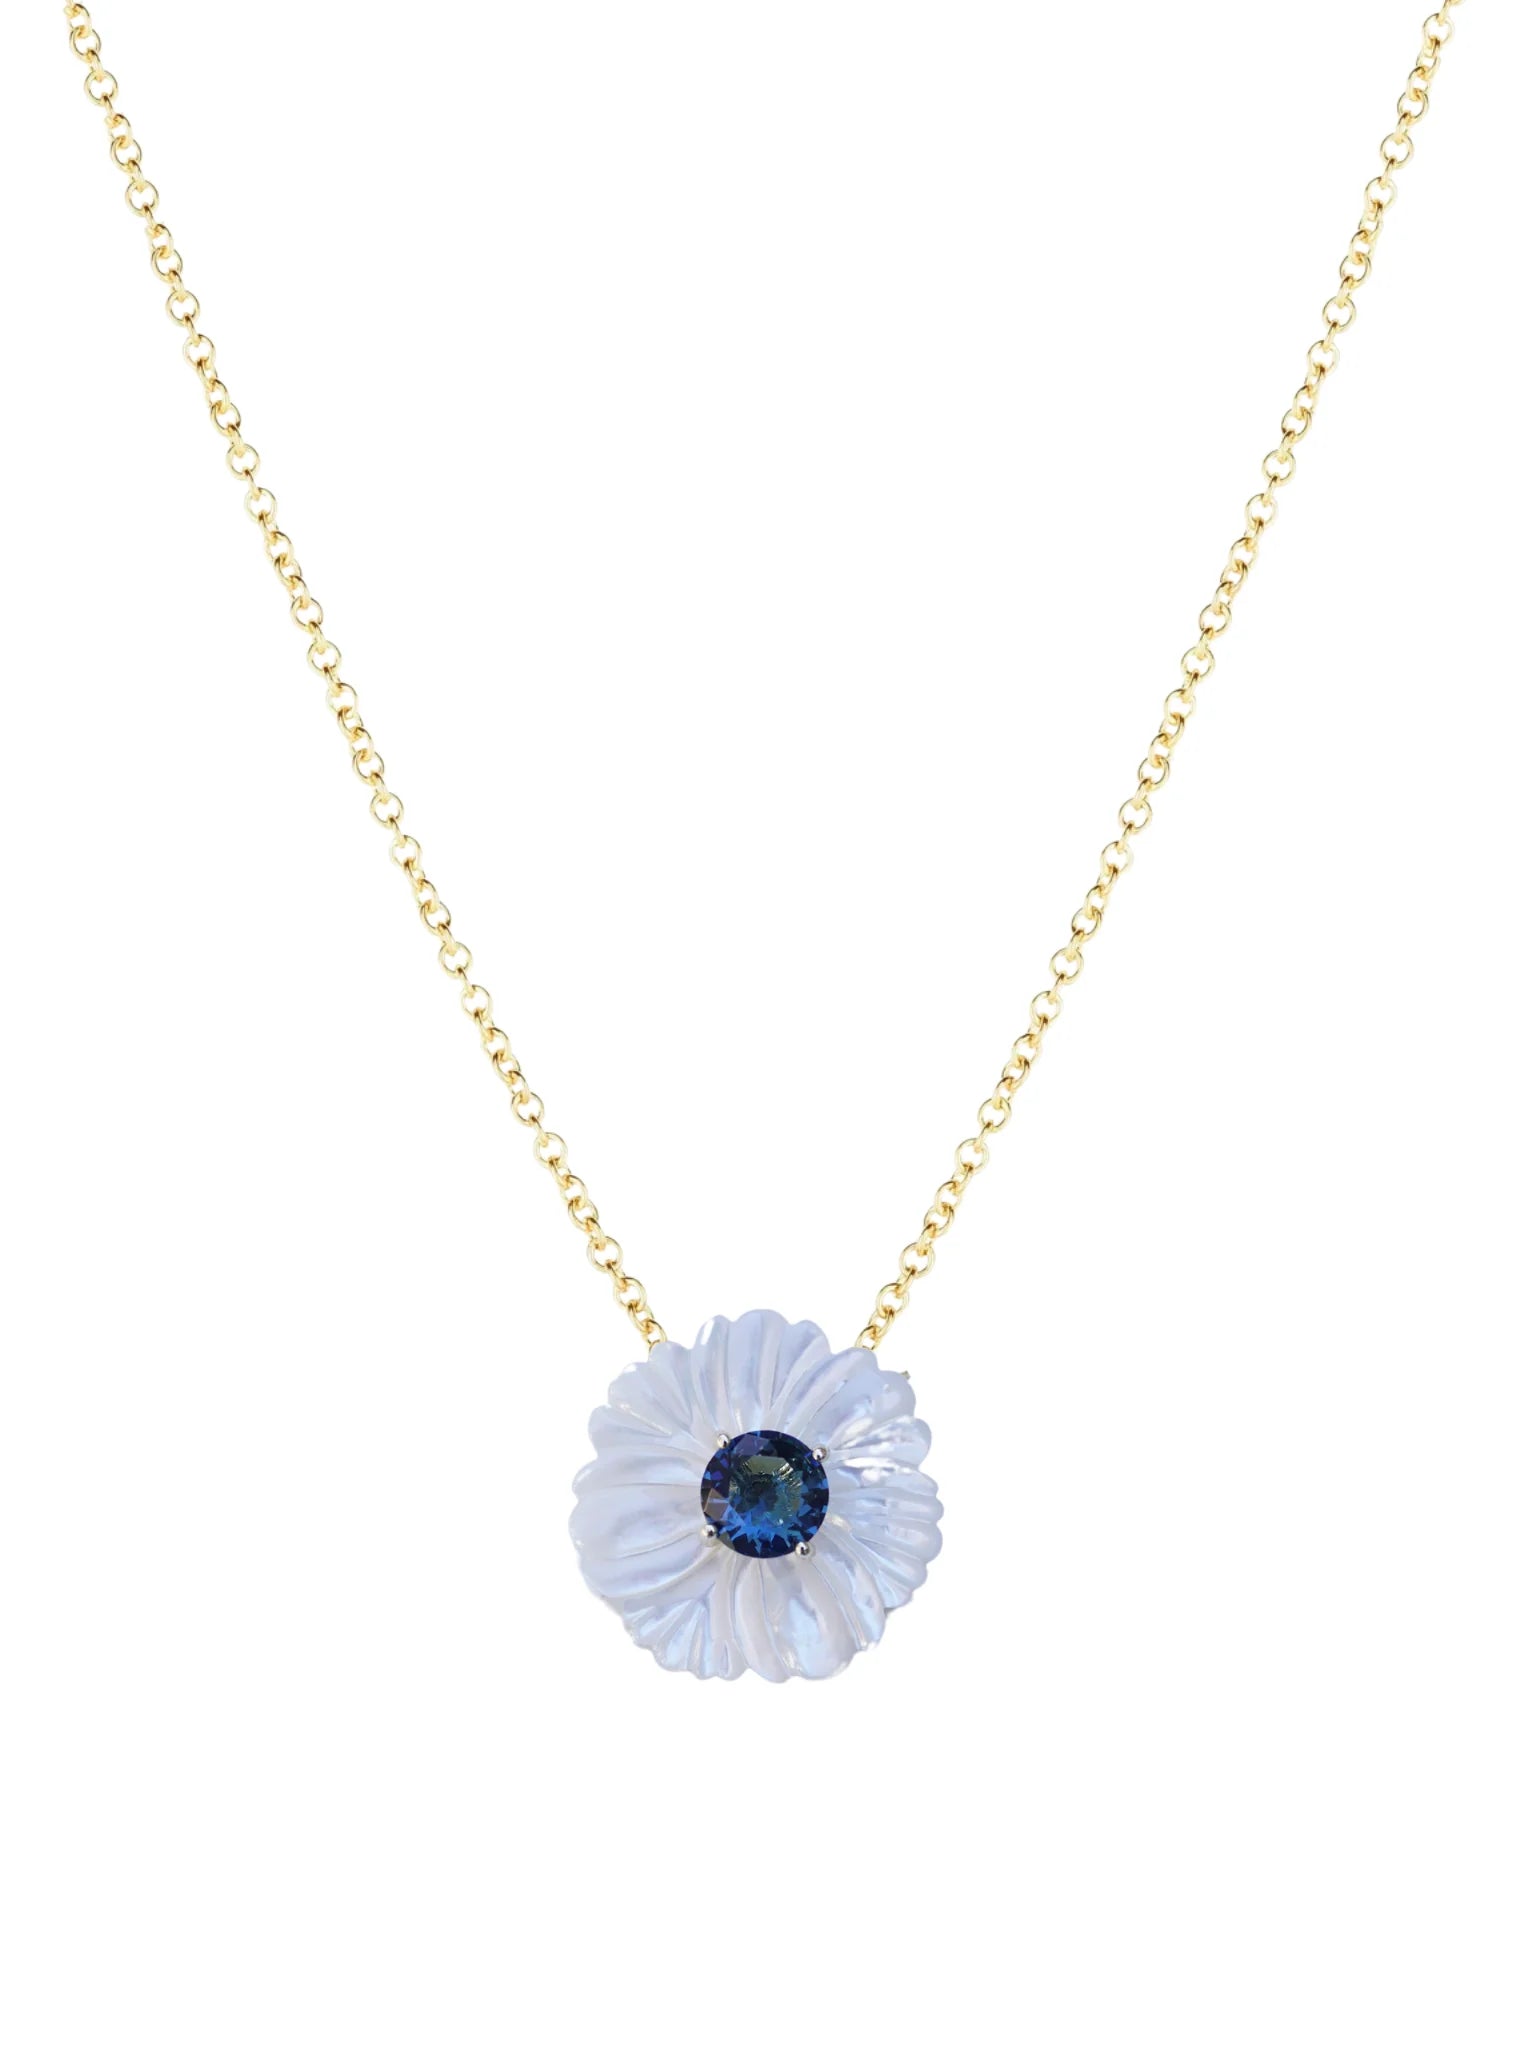 Nicole bathie mother of pearl + London blue necklace